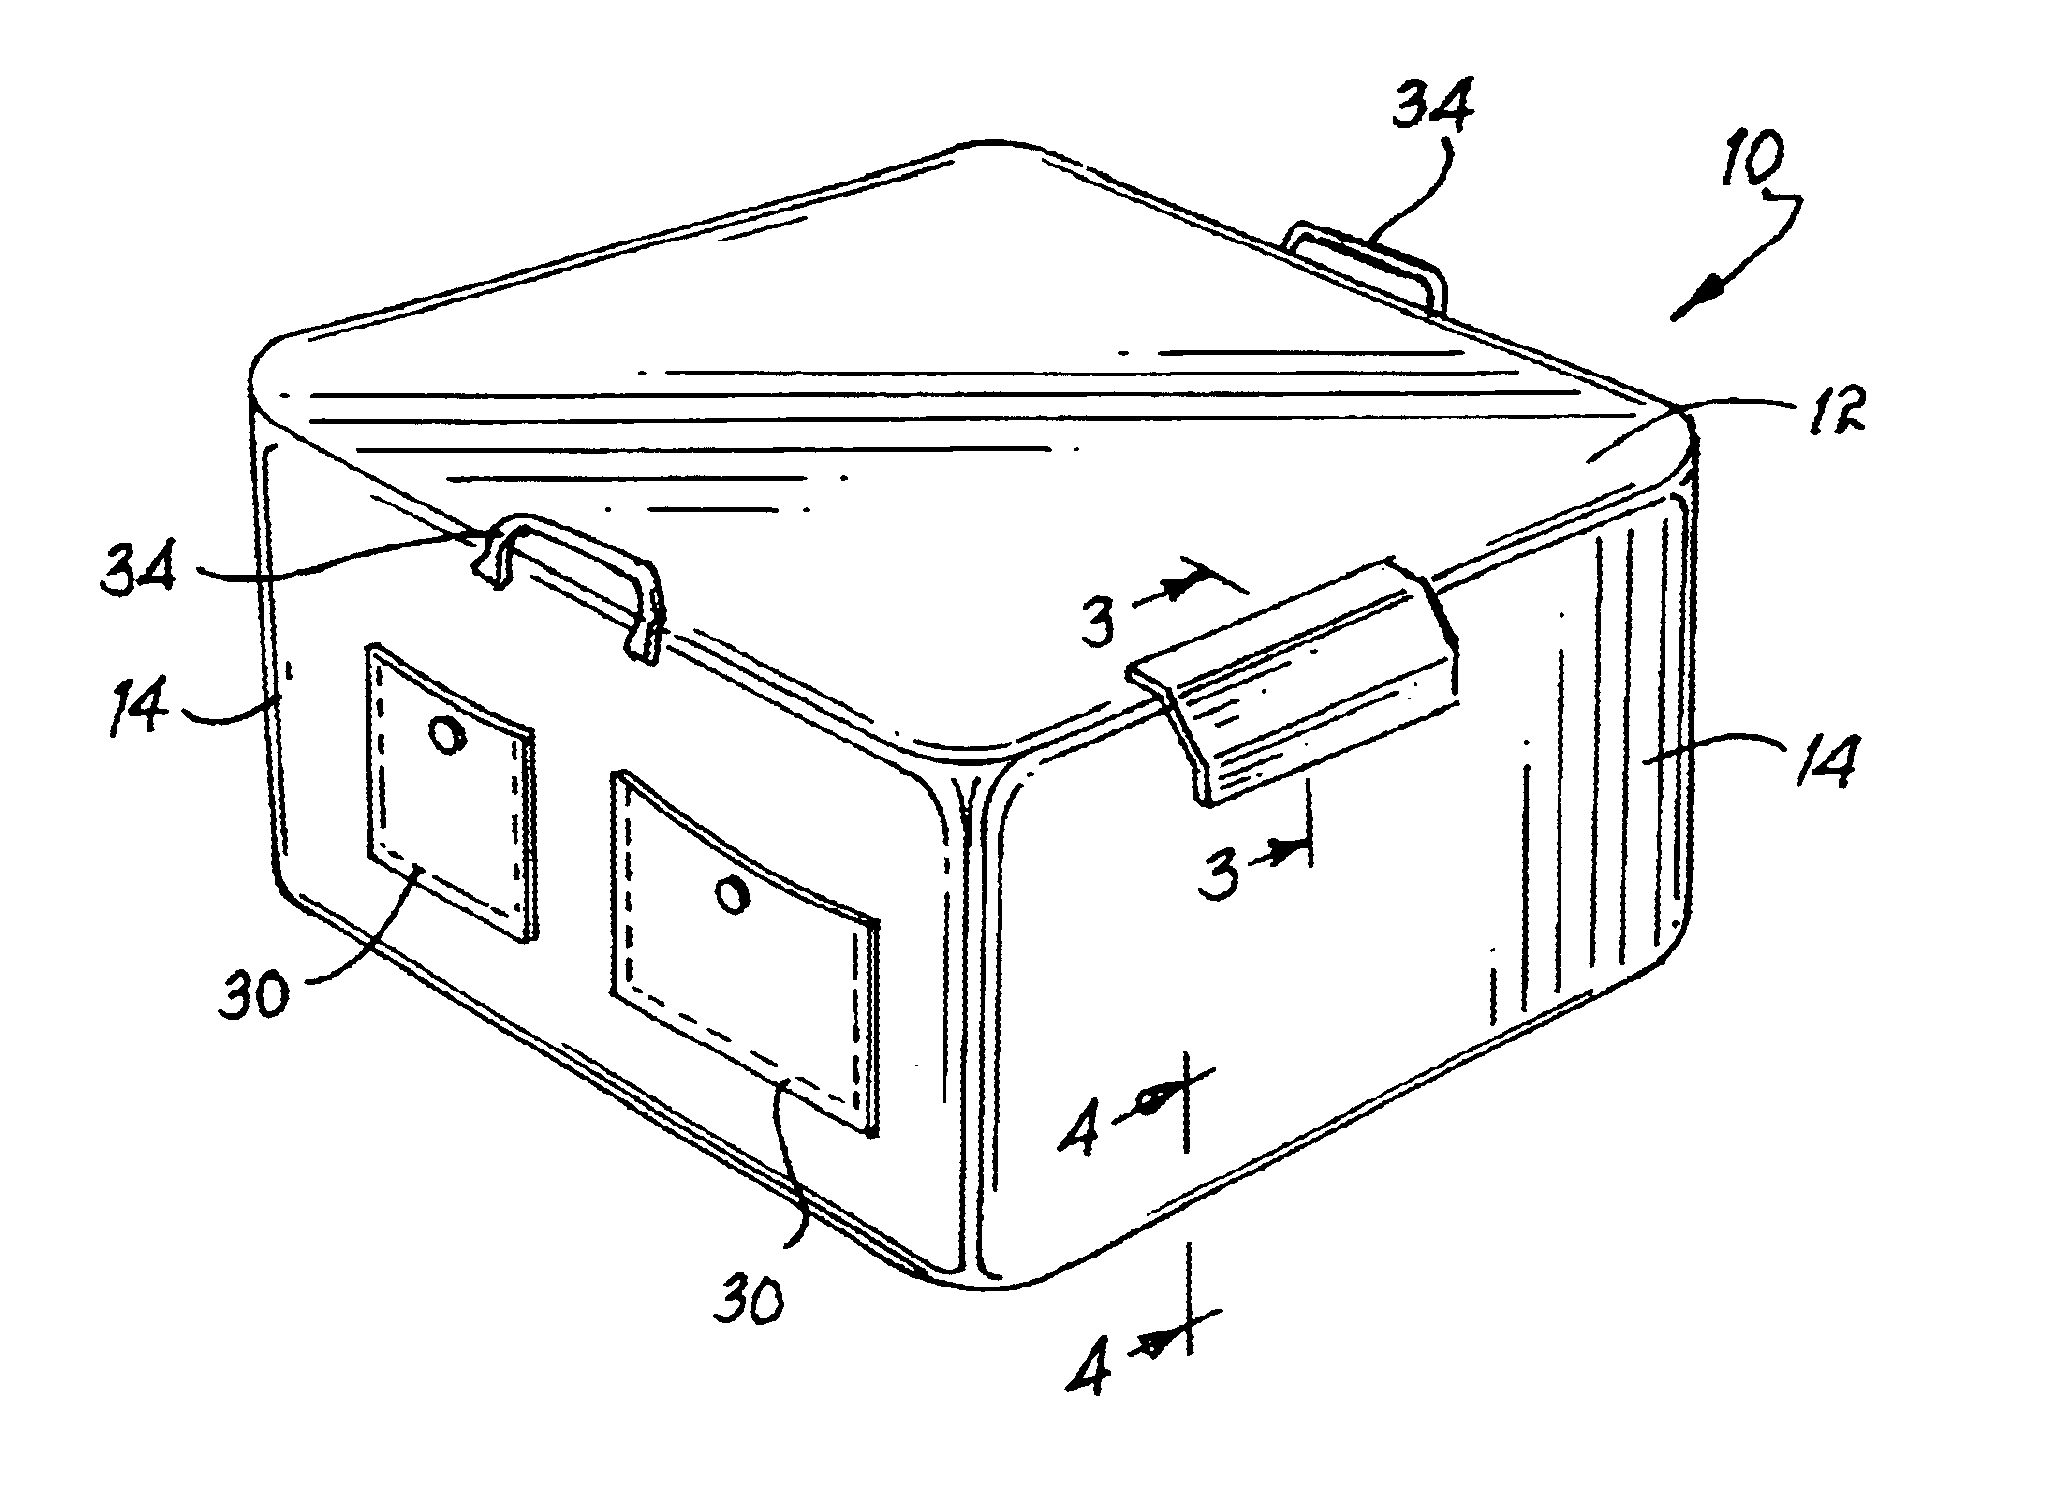 Lightweight insulated spa cover and method therefor